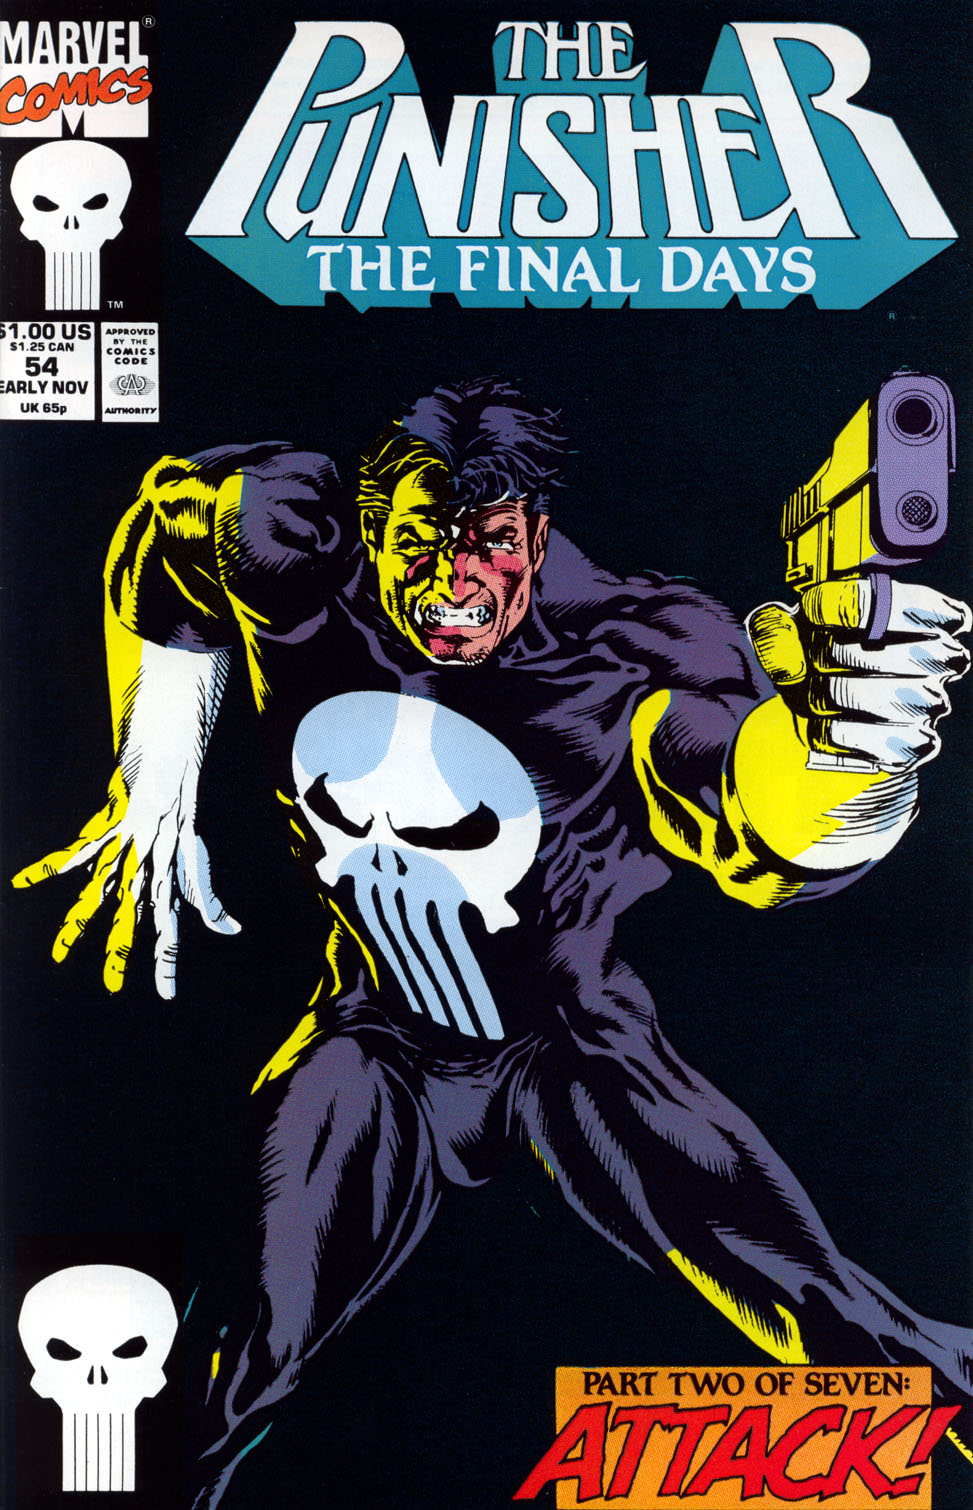 The Punisher (1987) issue 54 - The Final Days #02 - Page 1